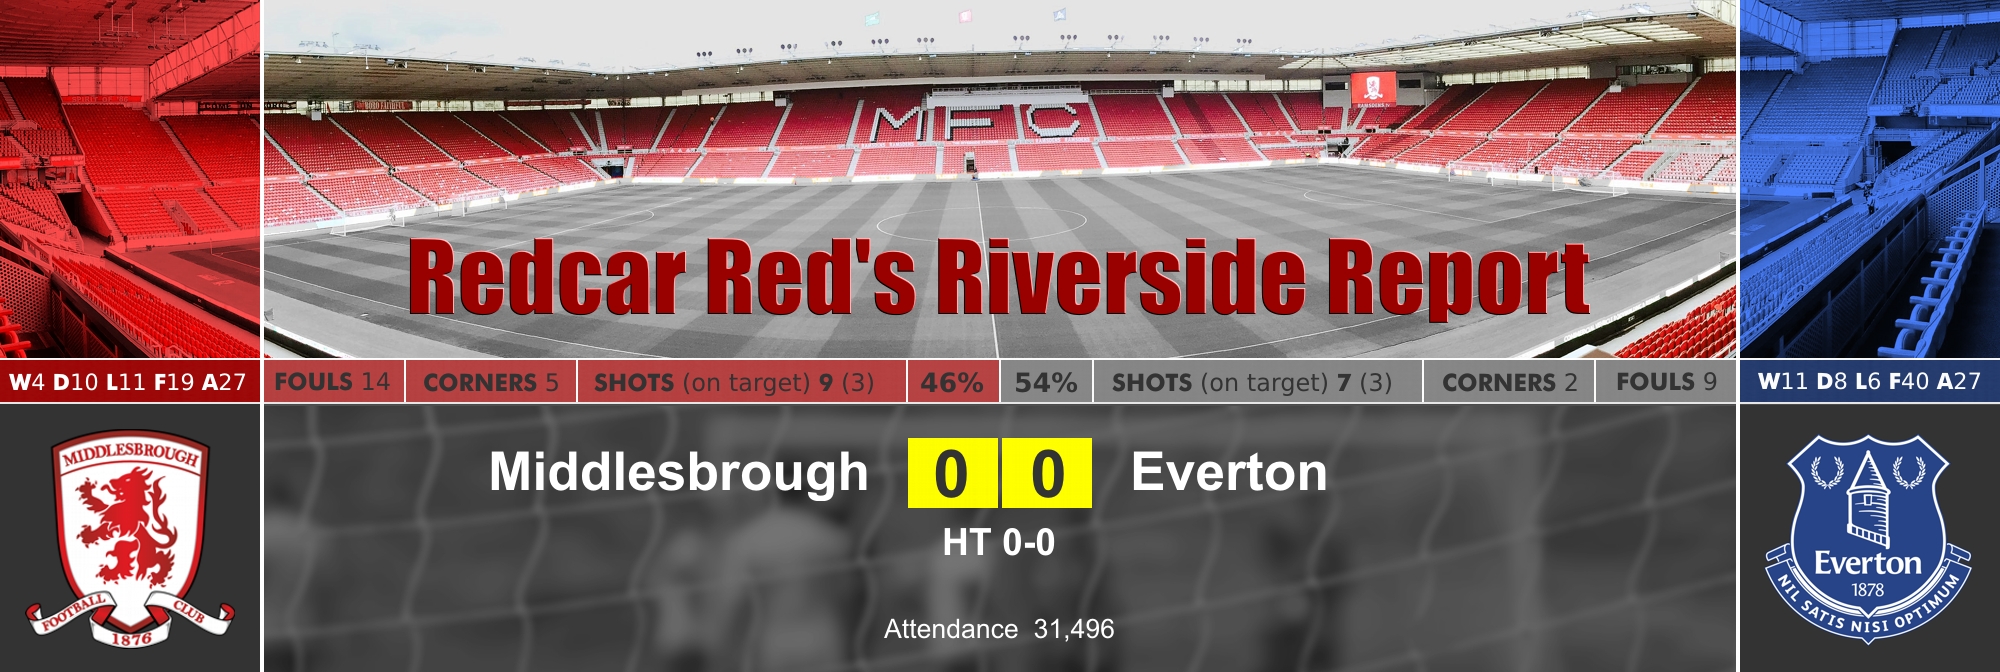 redcar-red-report-everton-2